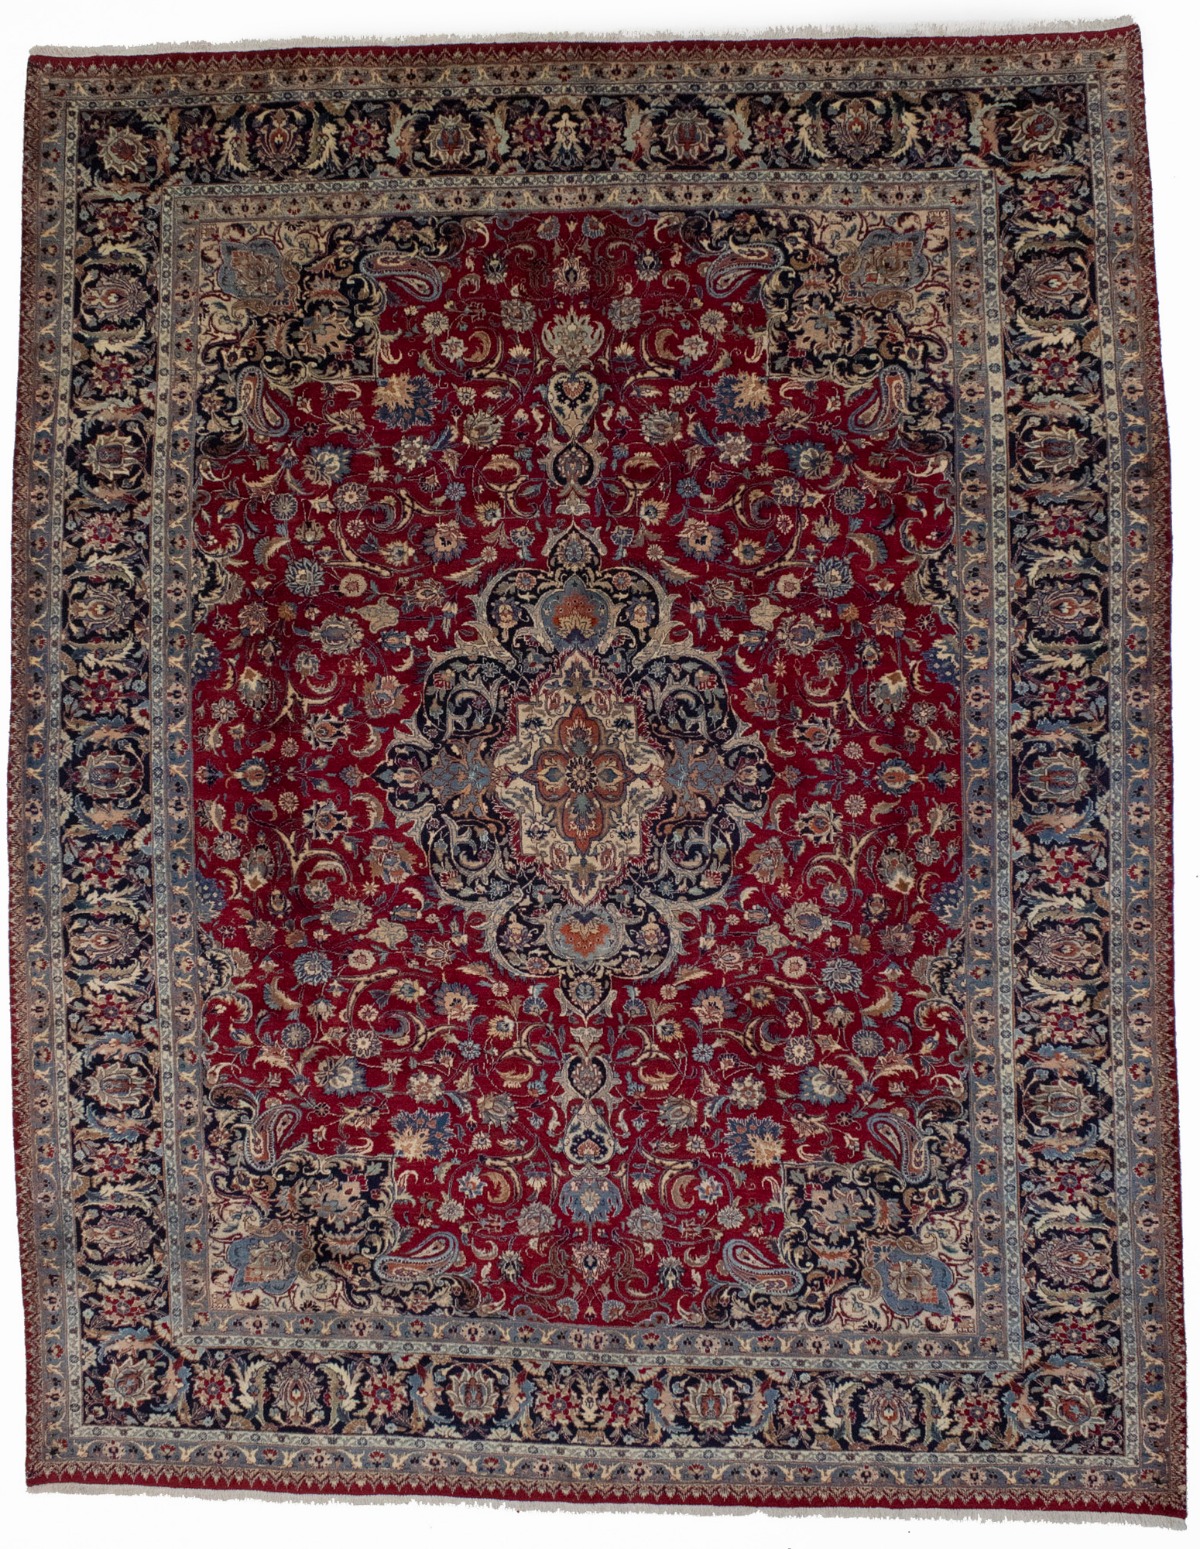 Vintage Red Traditional 9'7X12'4 Kashmar Persian Rug